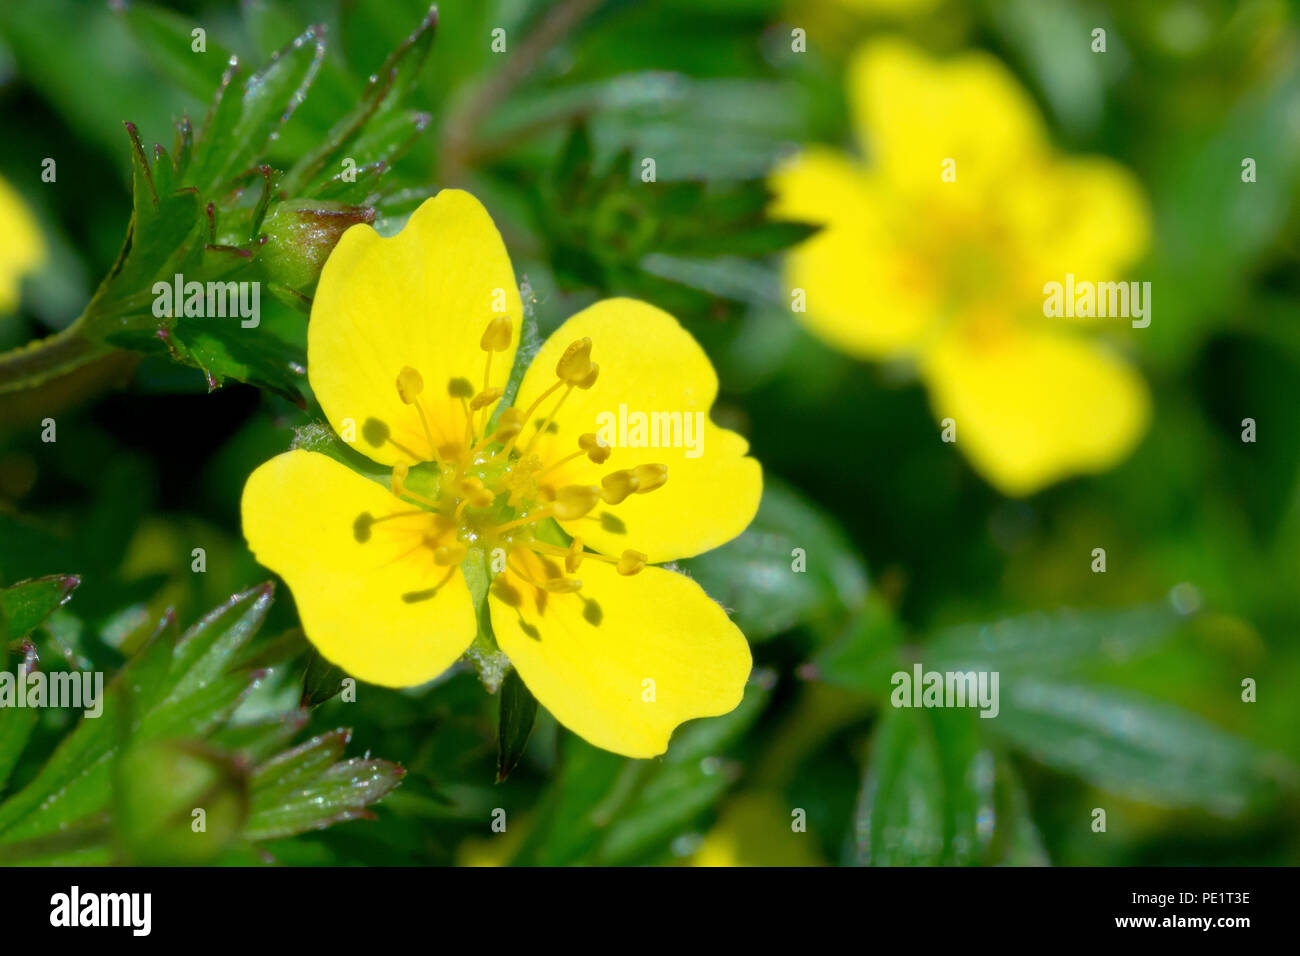 Tormentil (potentilla erecta), close up of a single flower with another in the background. Stock Photo